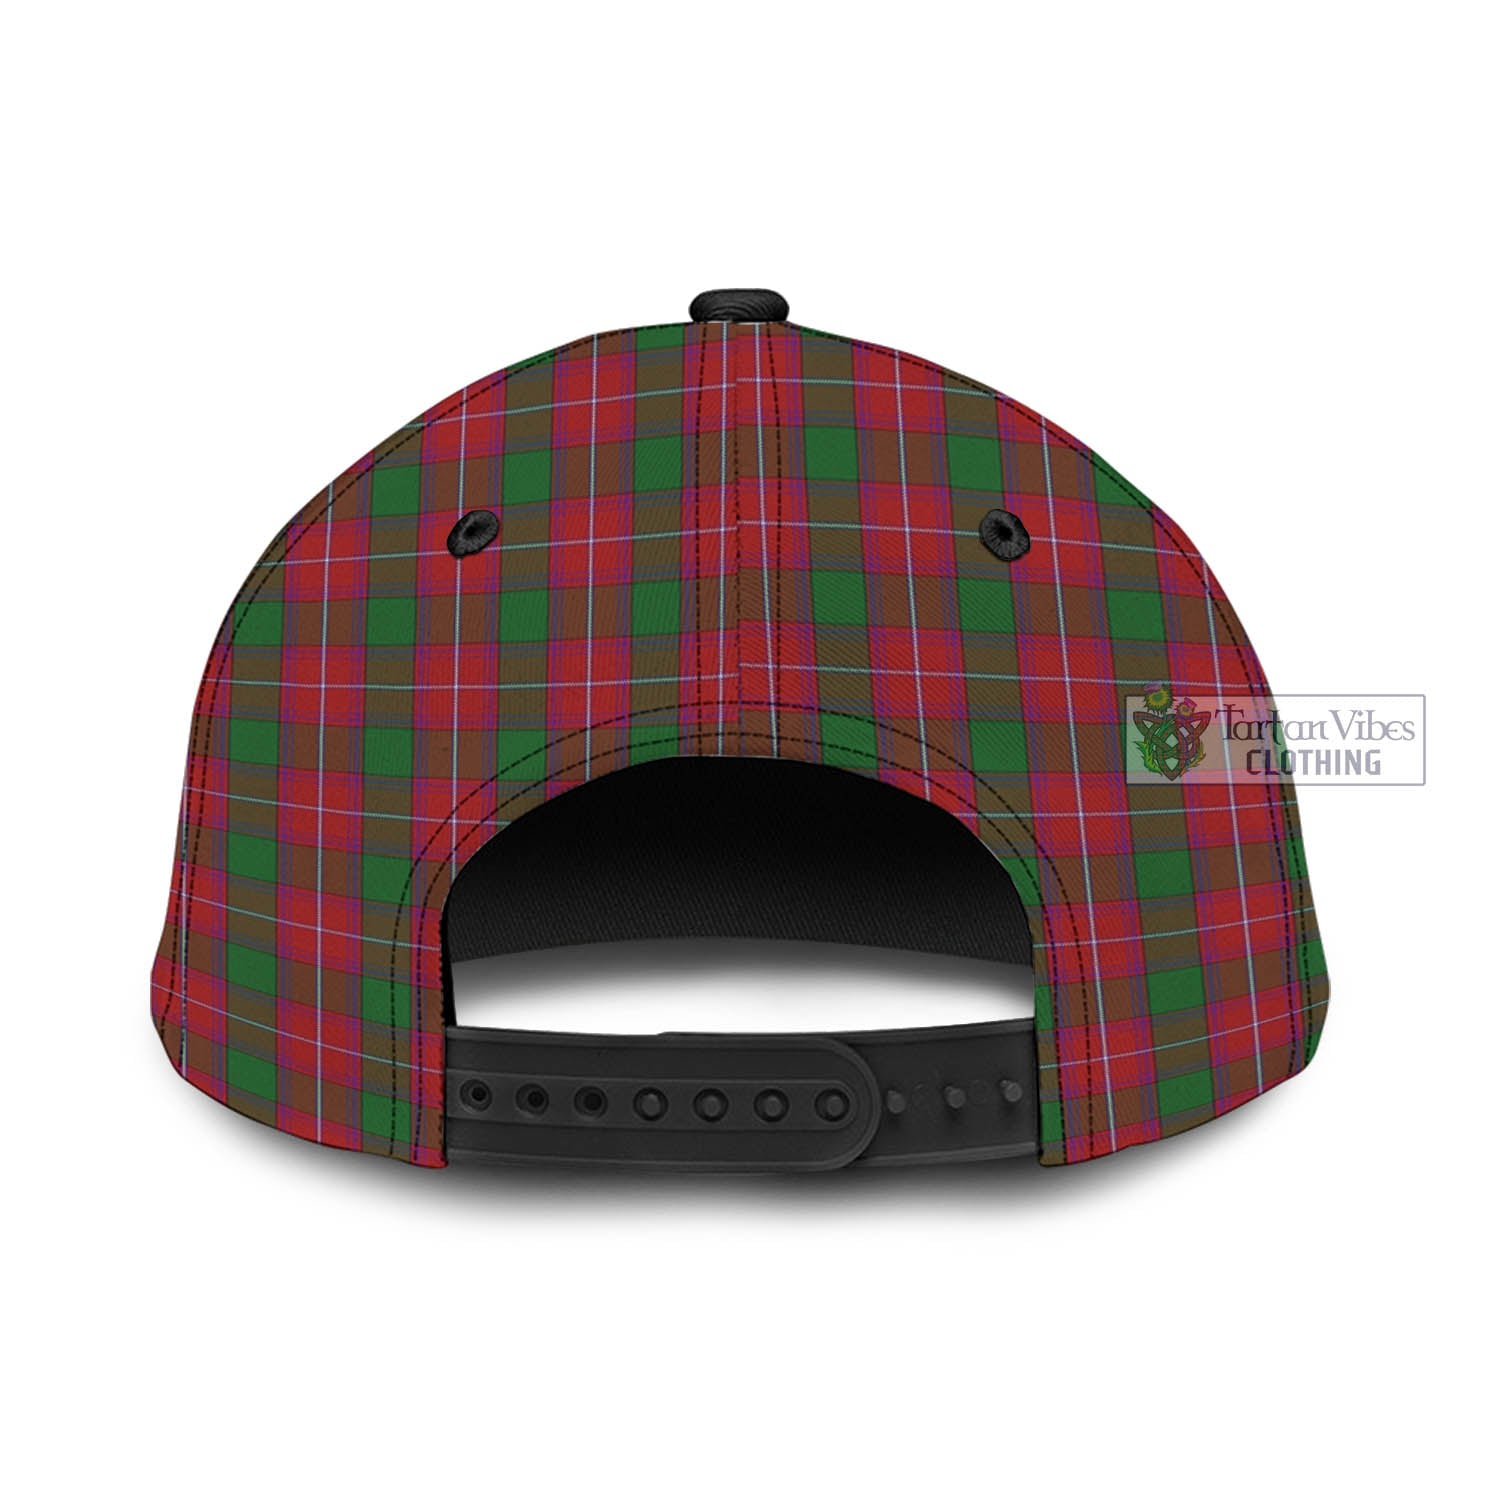 Tartan Vibes Clothing Rattray Tartan Classic Cap with Family Crest In Me Style